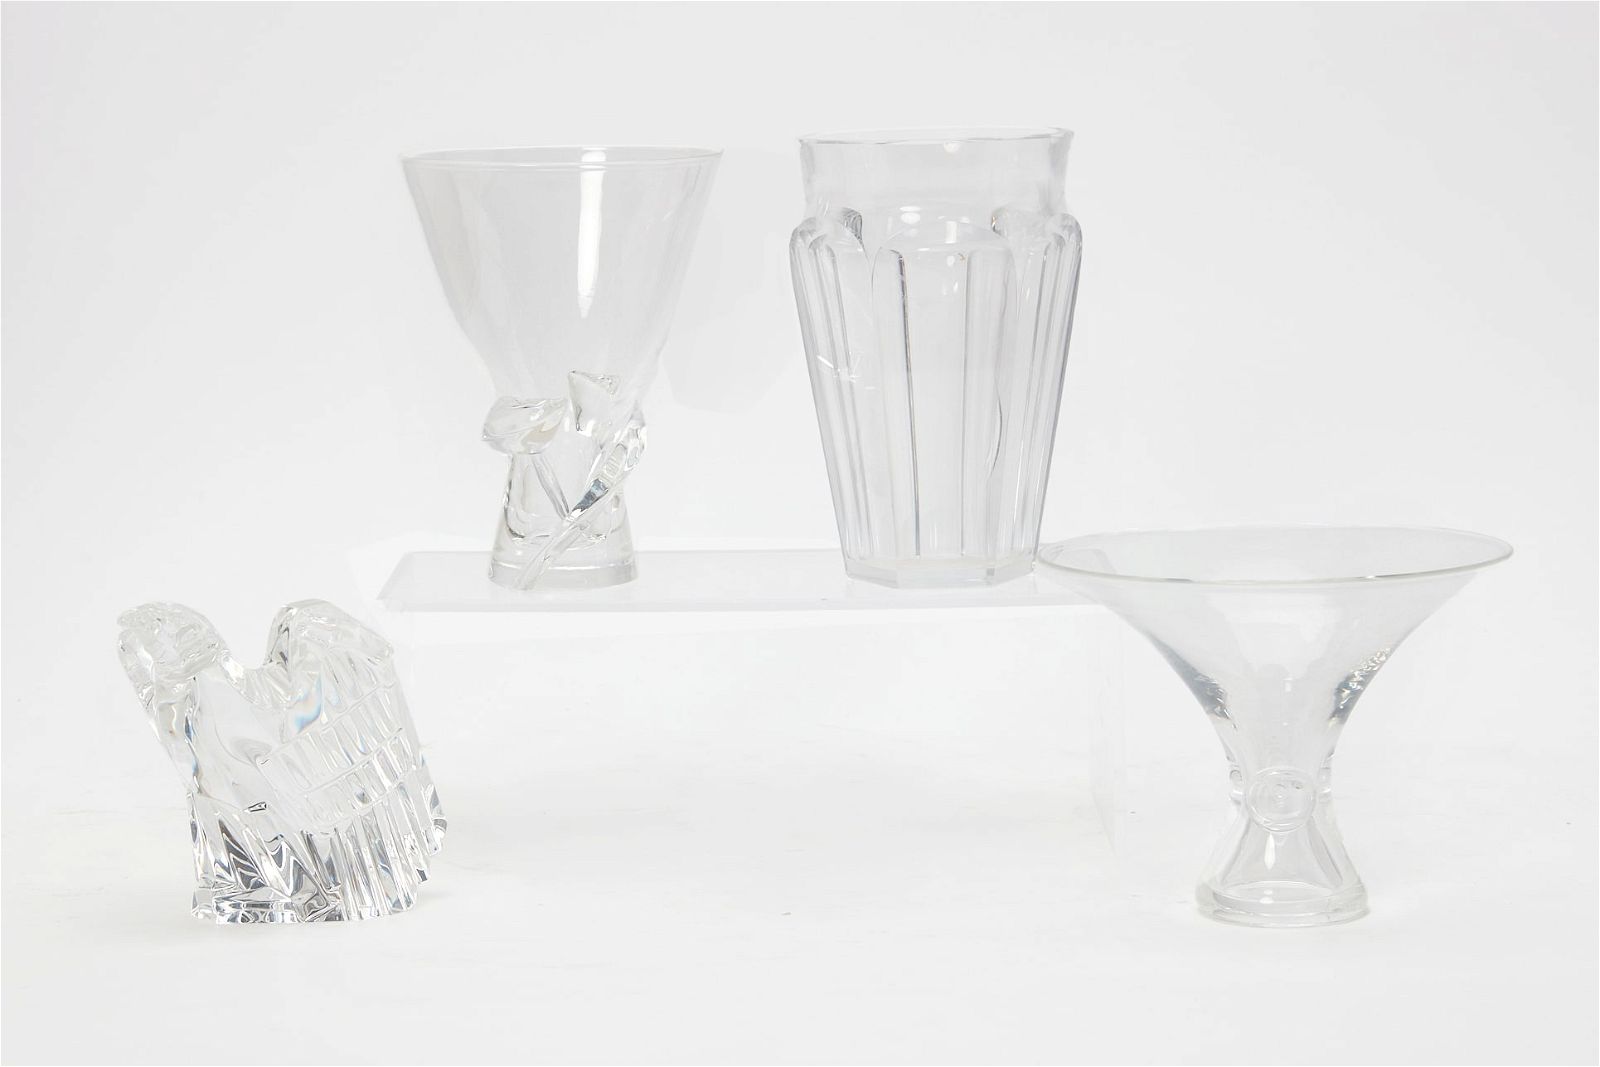 FOUR AMERICAN AND FRENCH GLASS